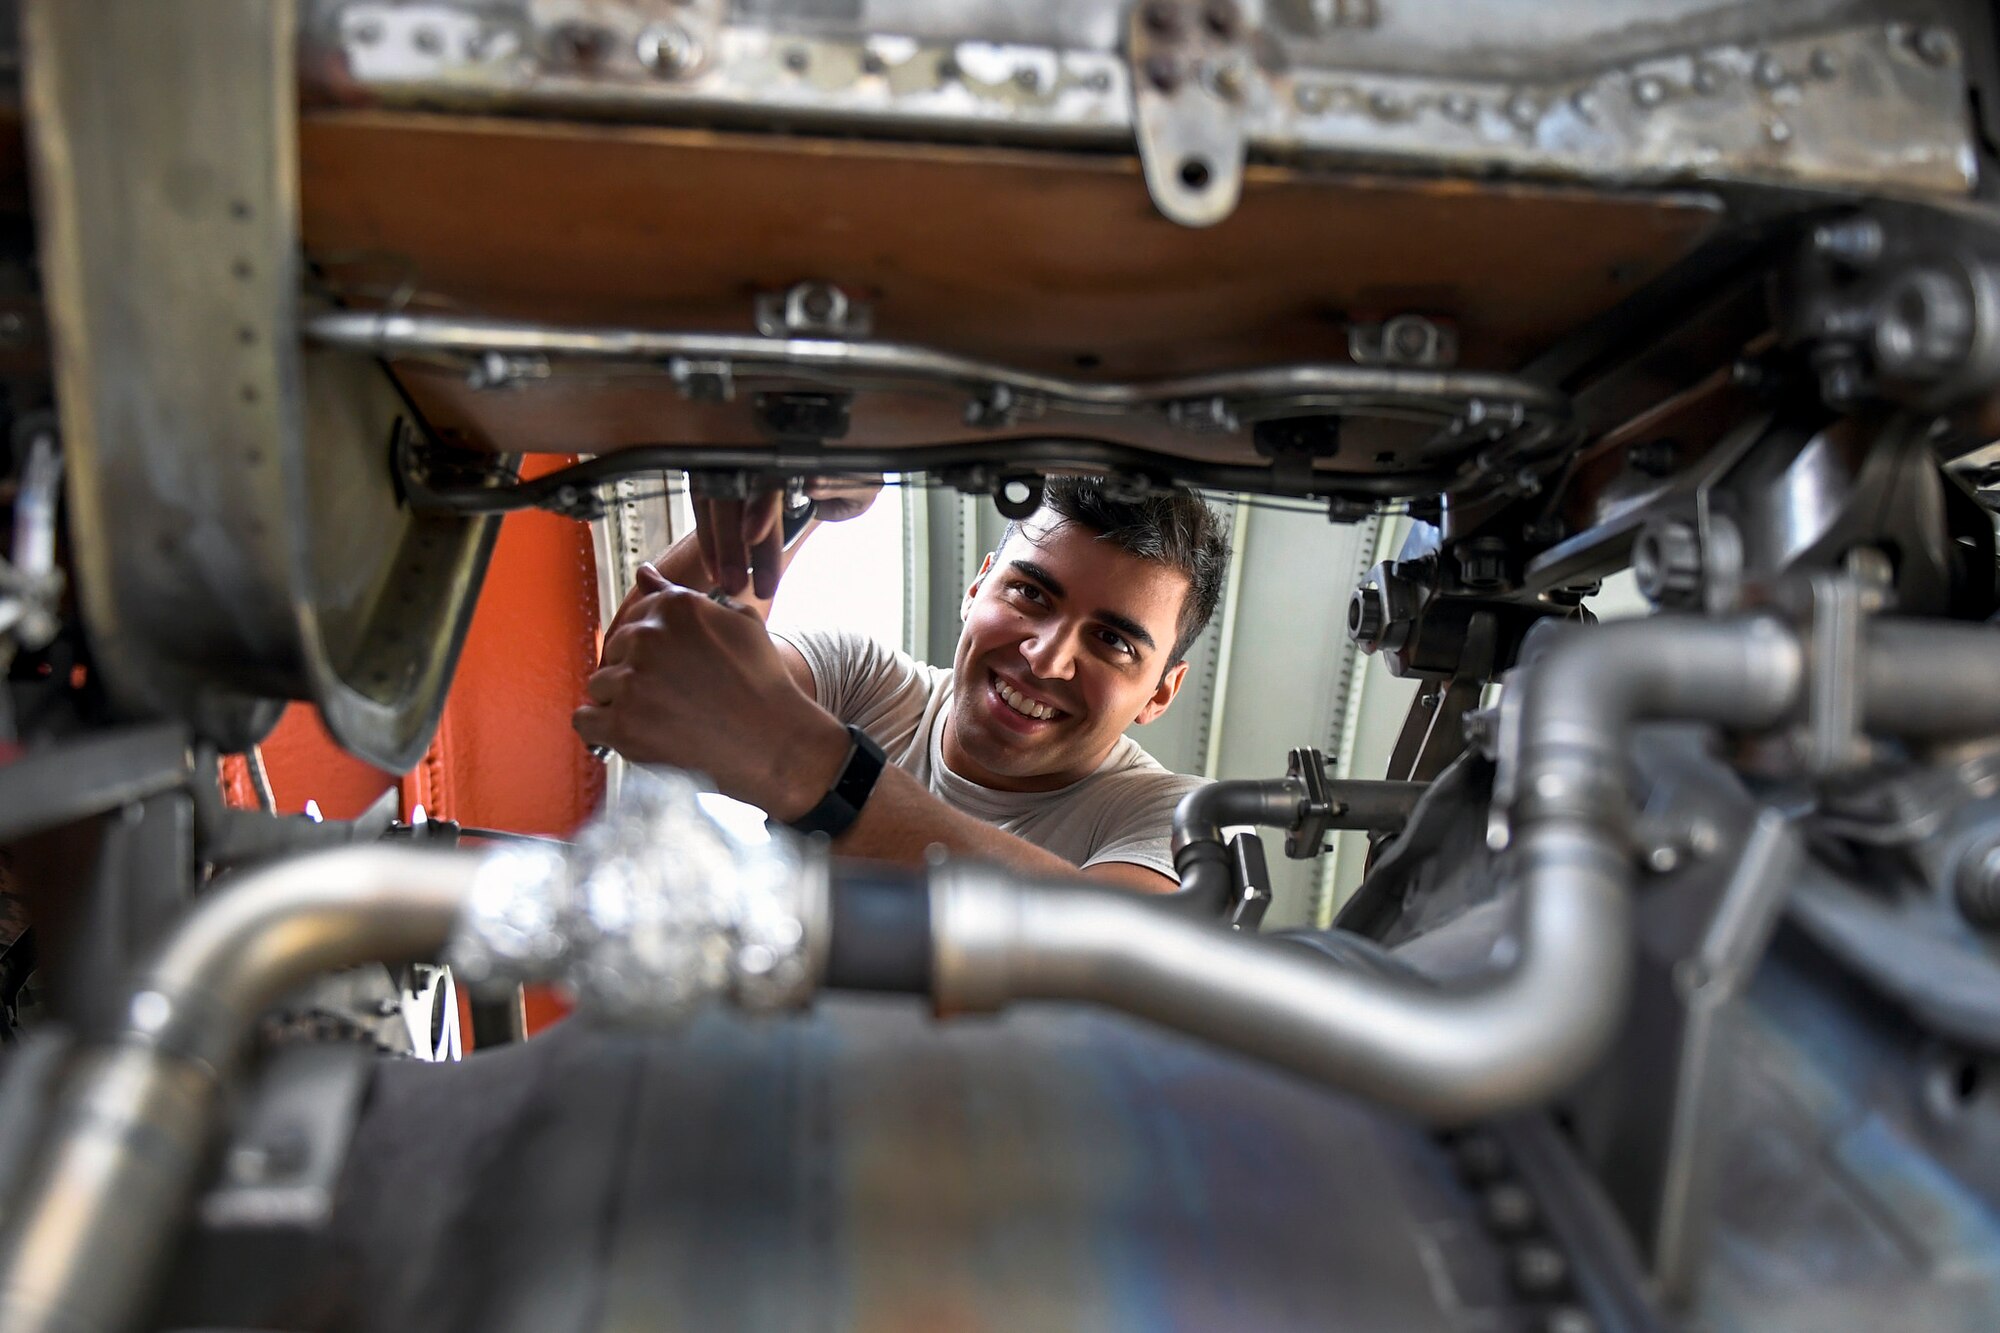 Senior Airman Eric Margoto performs maintenance on the tail engine of a KC-10 Extender at Joint Base McGuire-Dix-Lakehurst, New Jersey, May 24, 2017. Faulty fire detection systems in the tail engine were replaced. 